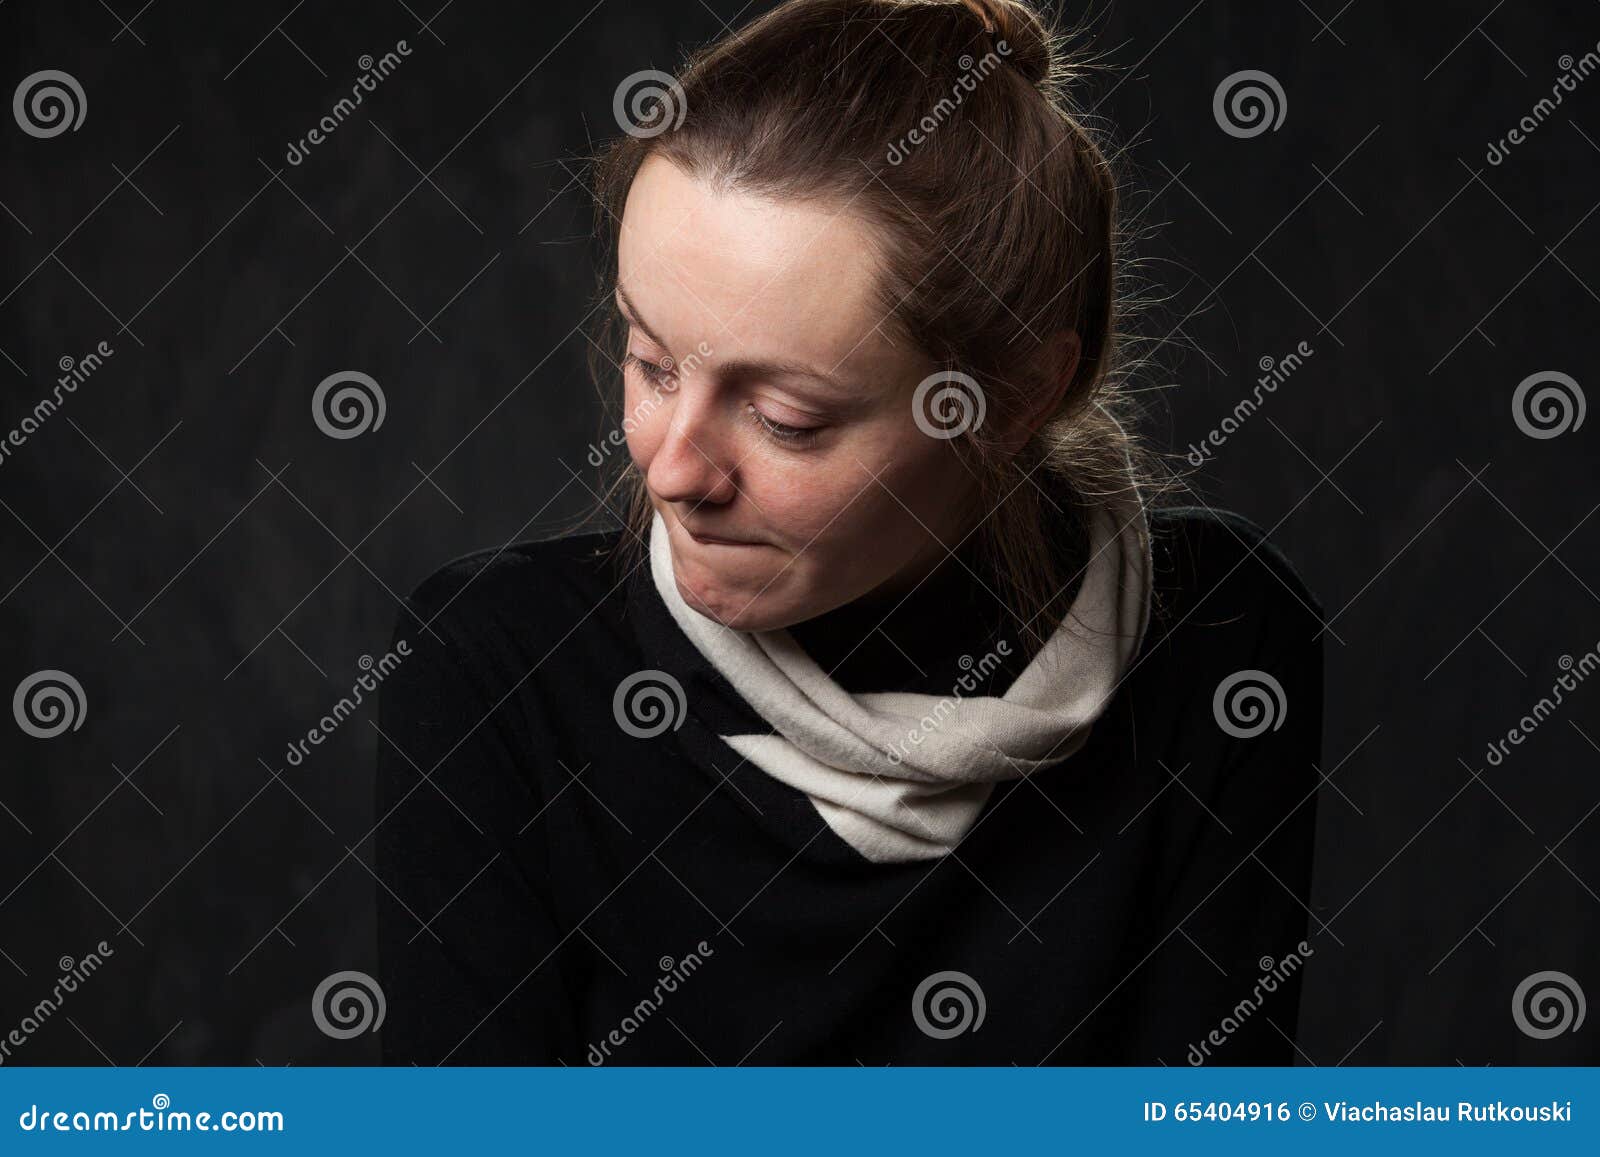 portrait of a young sad disoriented woman